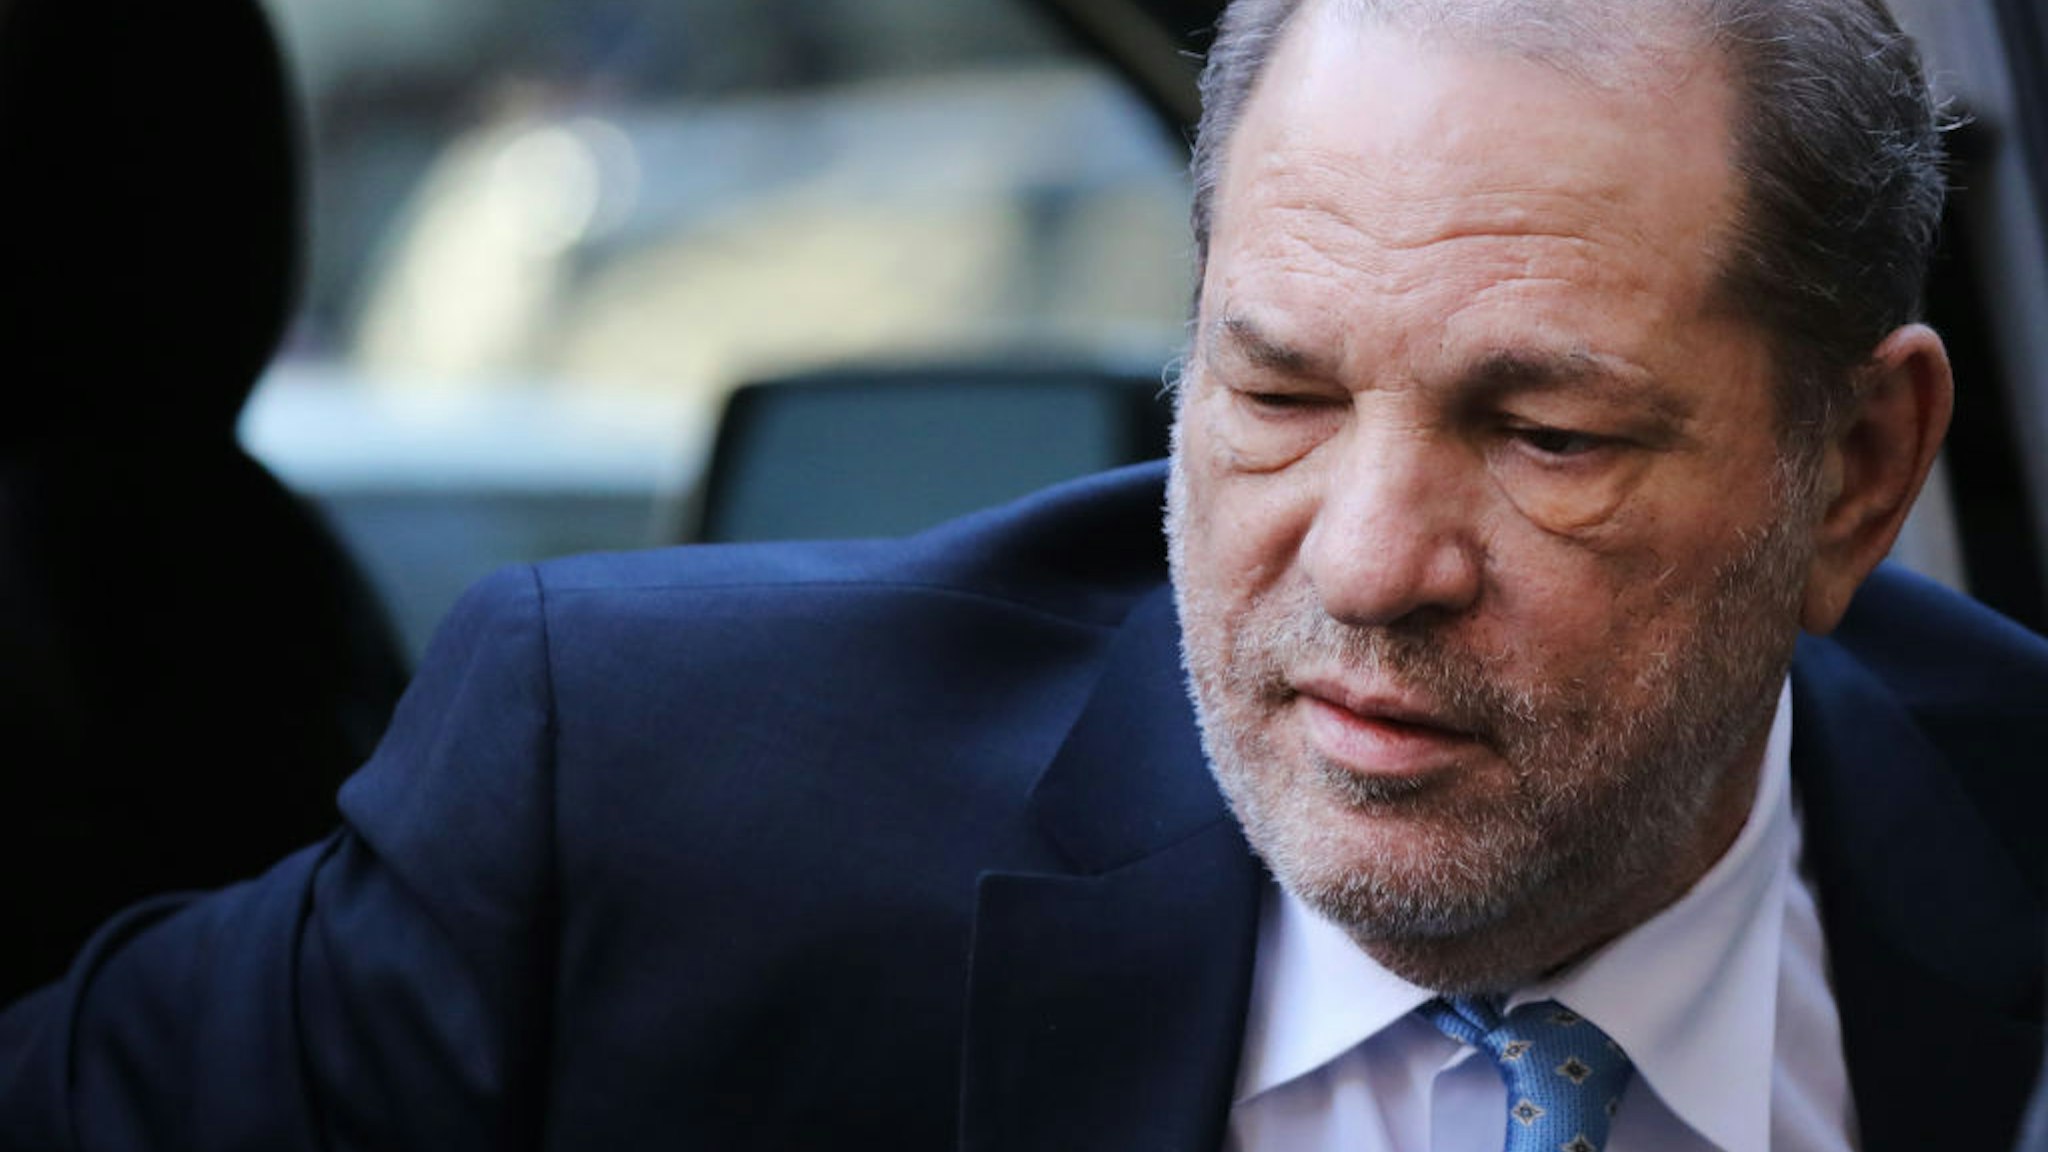 NEW YORK, NEW YORK - FEBRUARY 24: Harvey Weinstein enters a Manhattan court house as a jury continues with deliberations in his trial on February 24, 2020 in New York City. On Friday the judge asked the jury to keep deliberating after they announced that they are deadlocked on the charges of predatory sexual assault. Weinstein, a movie producer whose alleged sexual misconduct helped spark the #MeToo movement, pleaded not-guilty on five counts of rape and sexual assault against two unnamed women and faces a possible life sentence in prison.